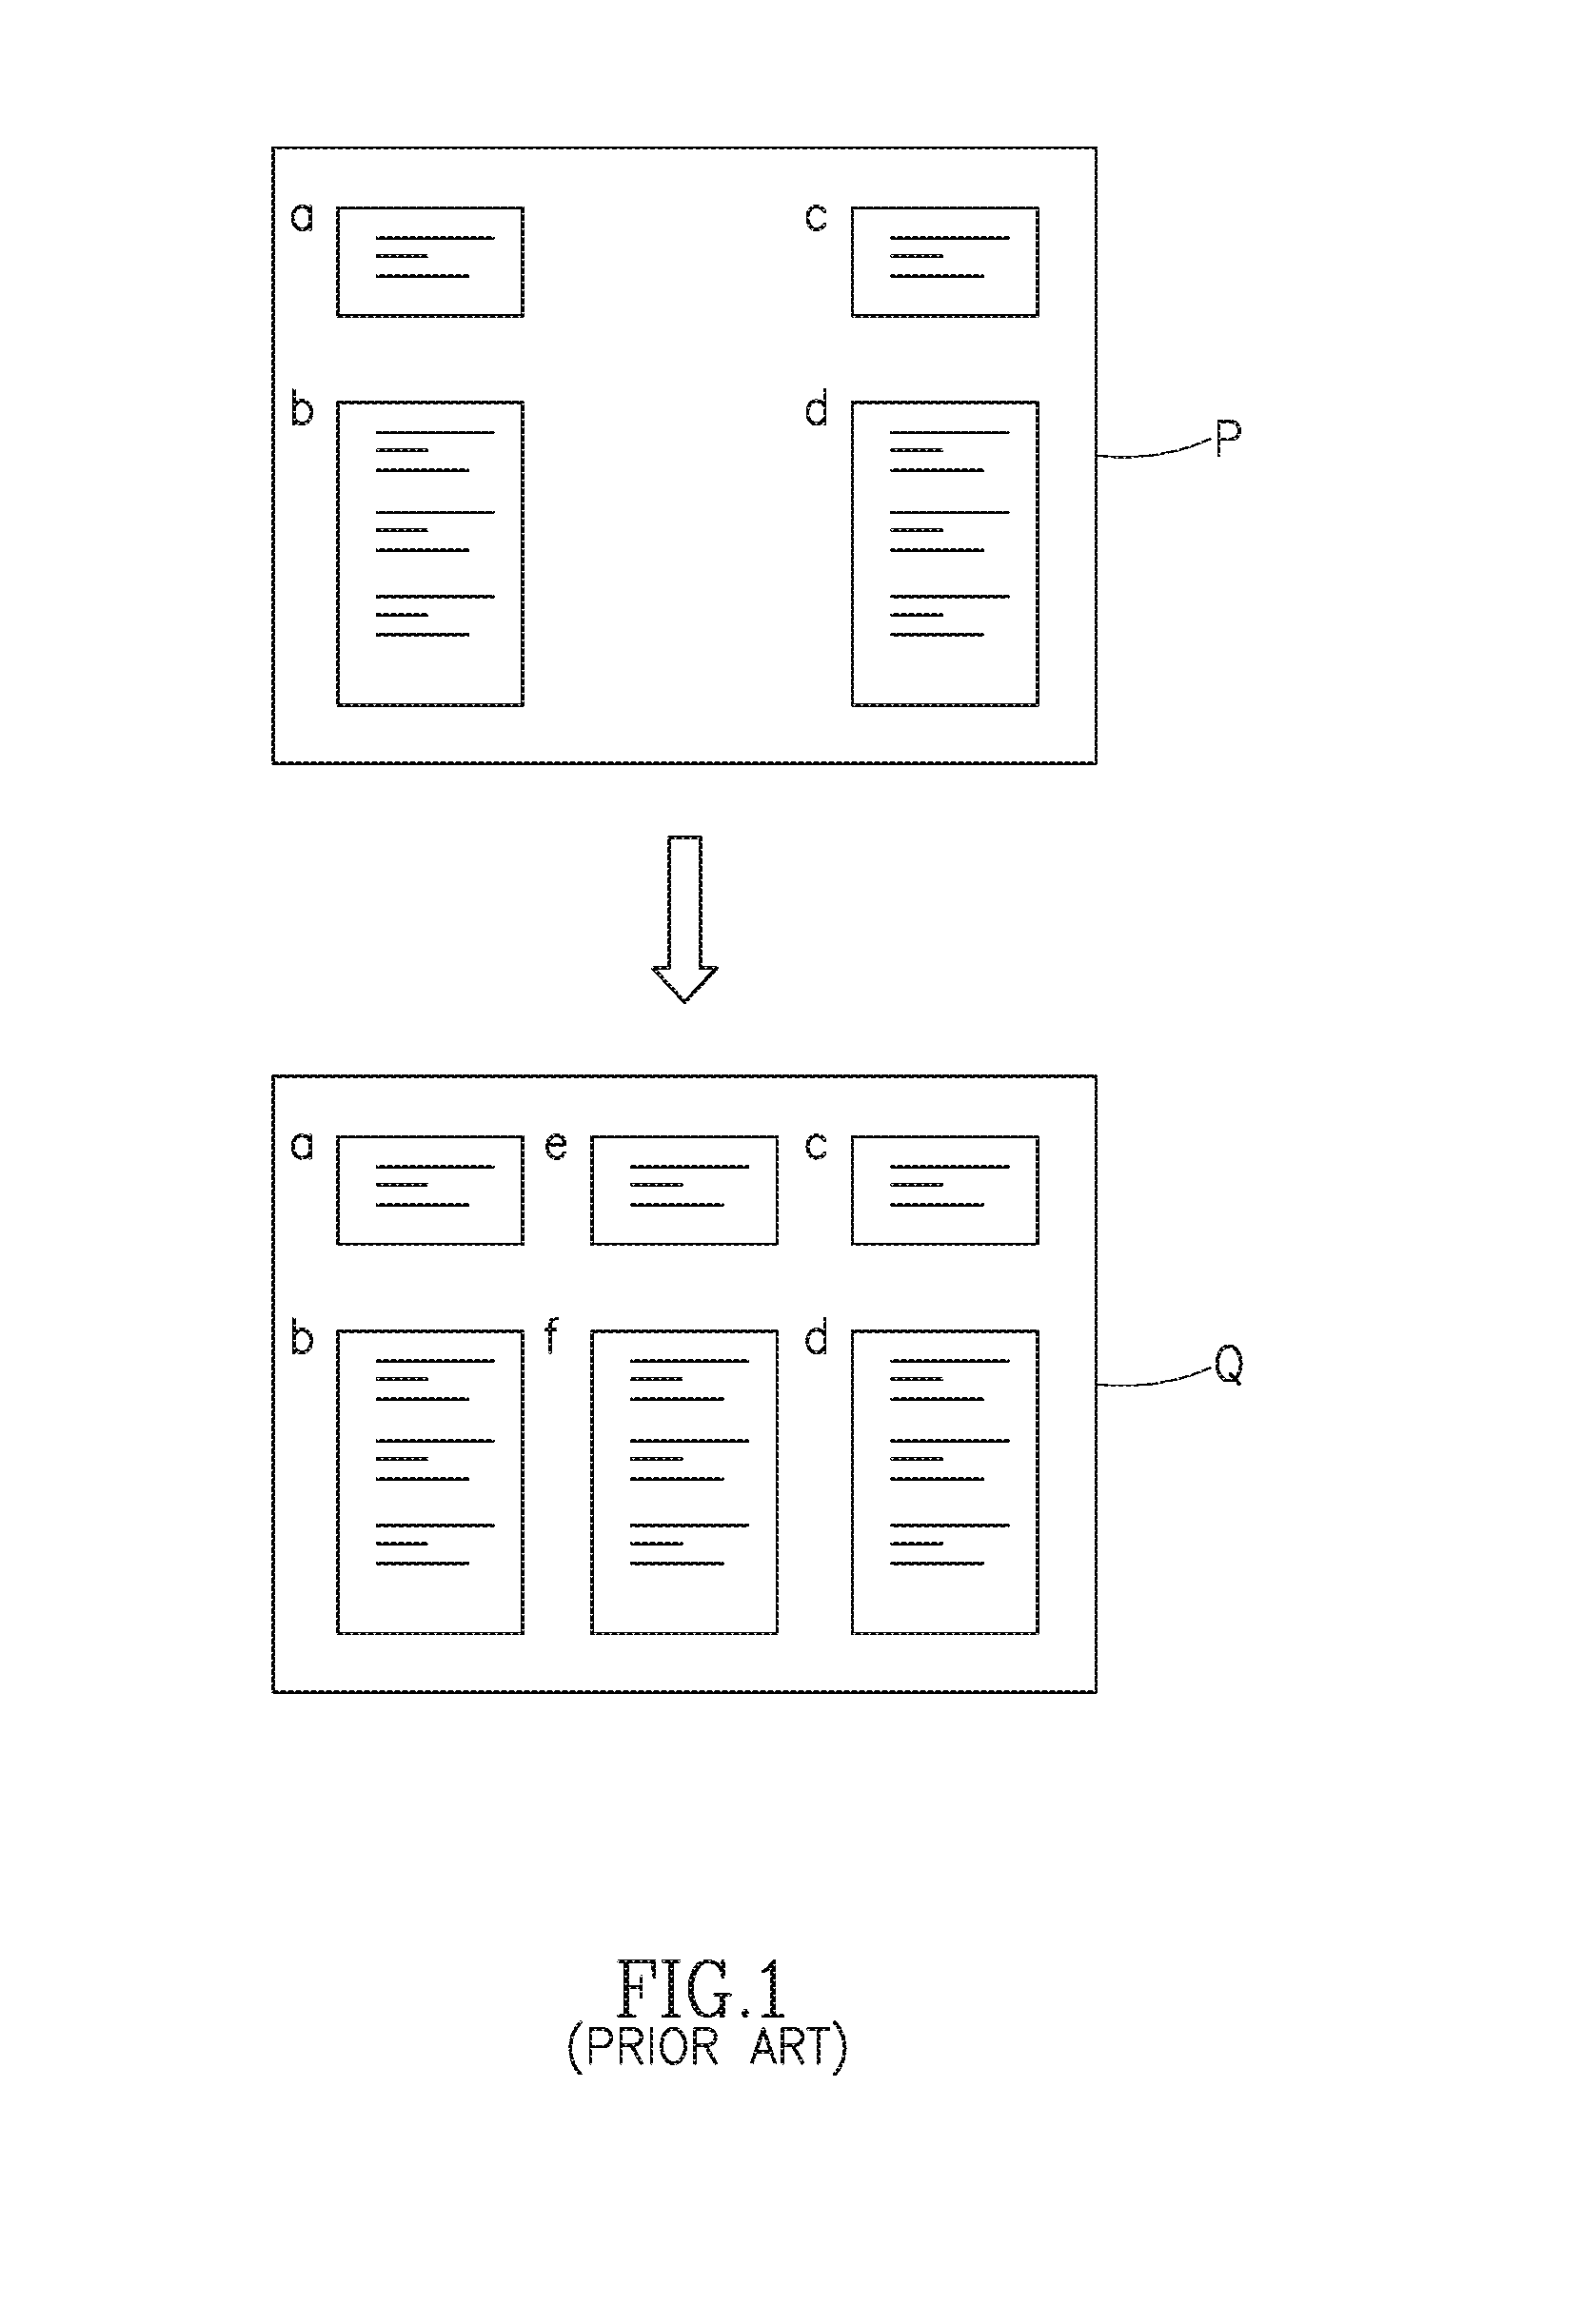 Method and system for section-based editing of a website page